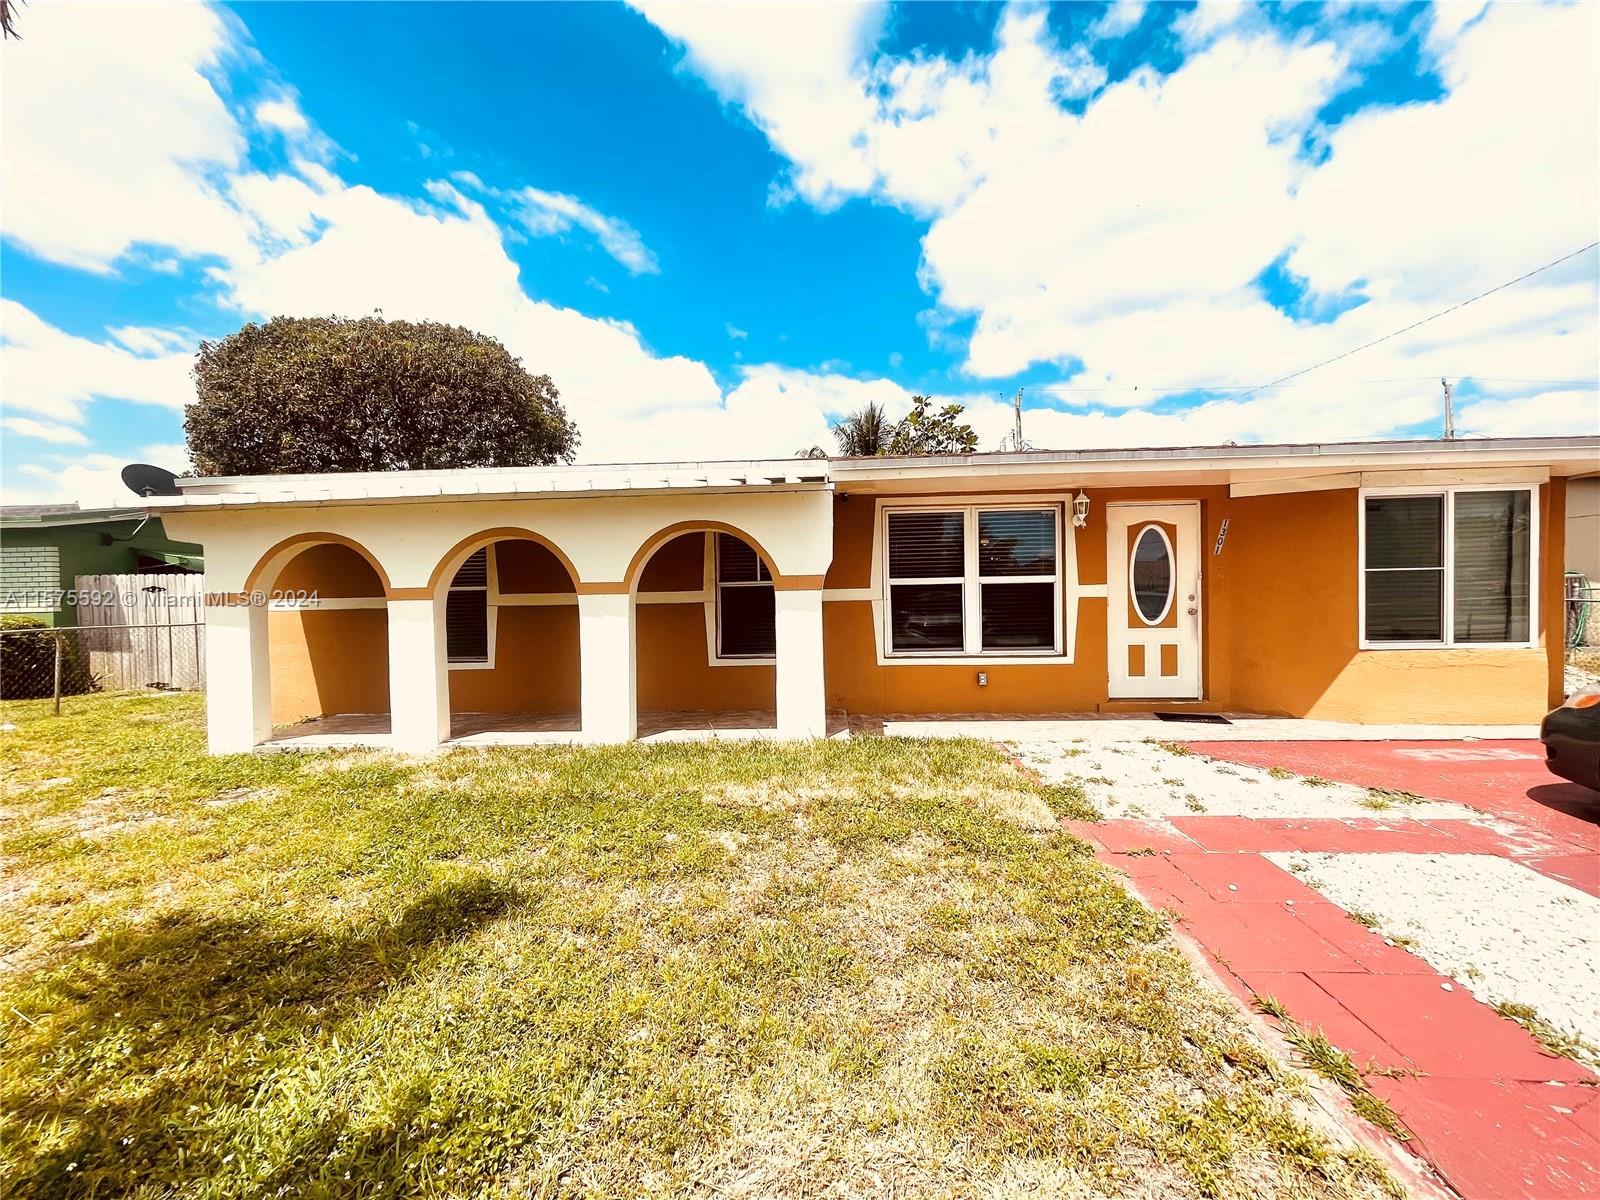 1301 NW 31st Way 0, Lauderhill, Florida 33311, 3 Bedrooms Bedrooms, ,1 BathroomBathrooms,Residentiallease,For Rent,1301 NW 31st Way 0,A11575592